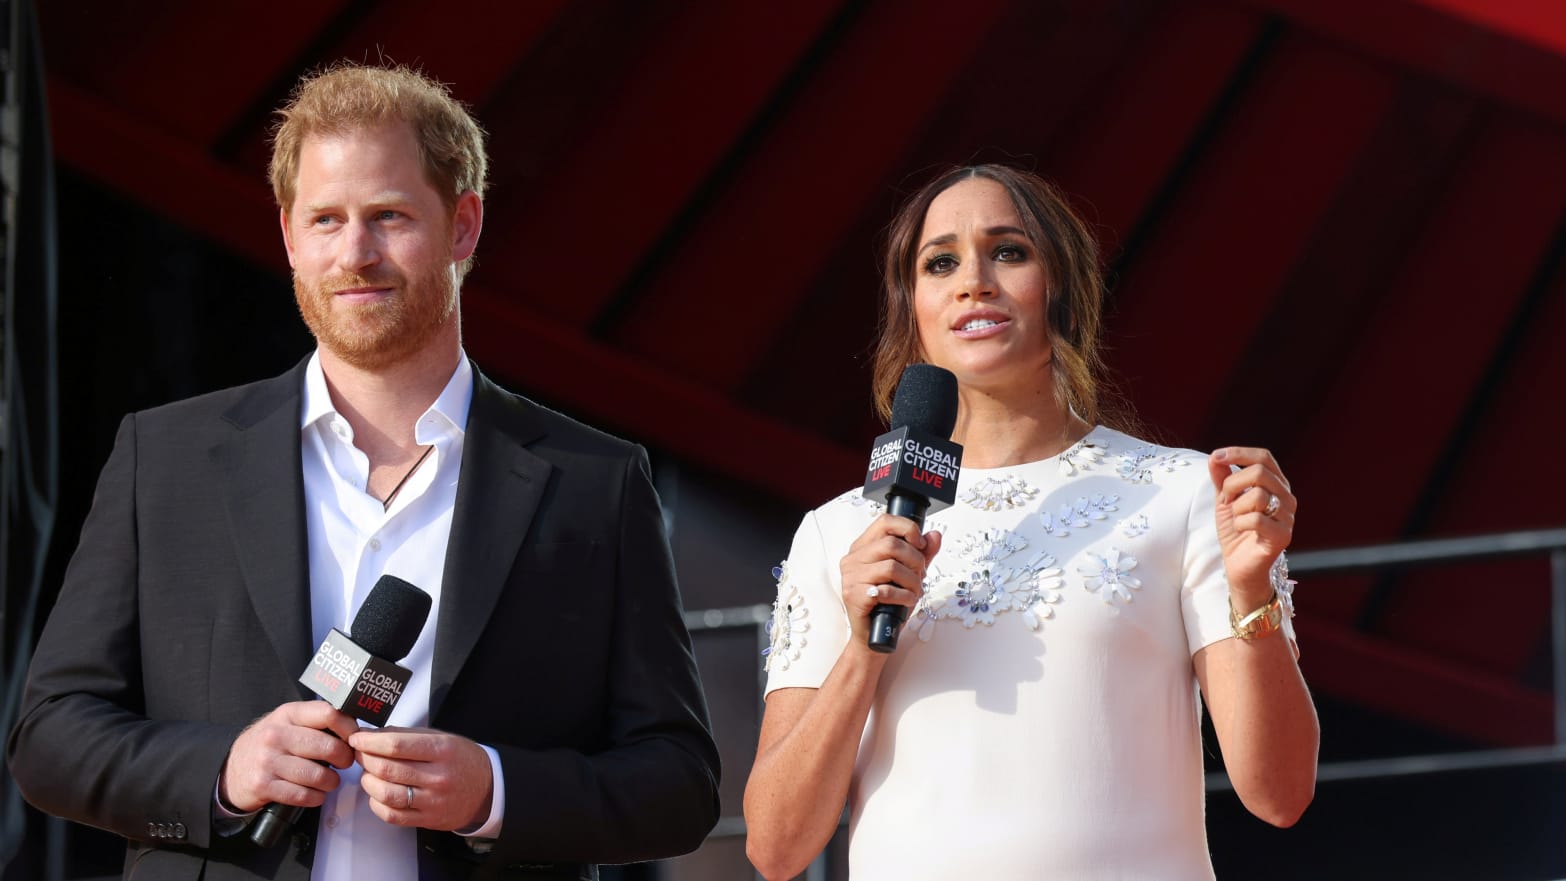 Meghan Markle to Get New Award for ‘Tireless’ Activism